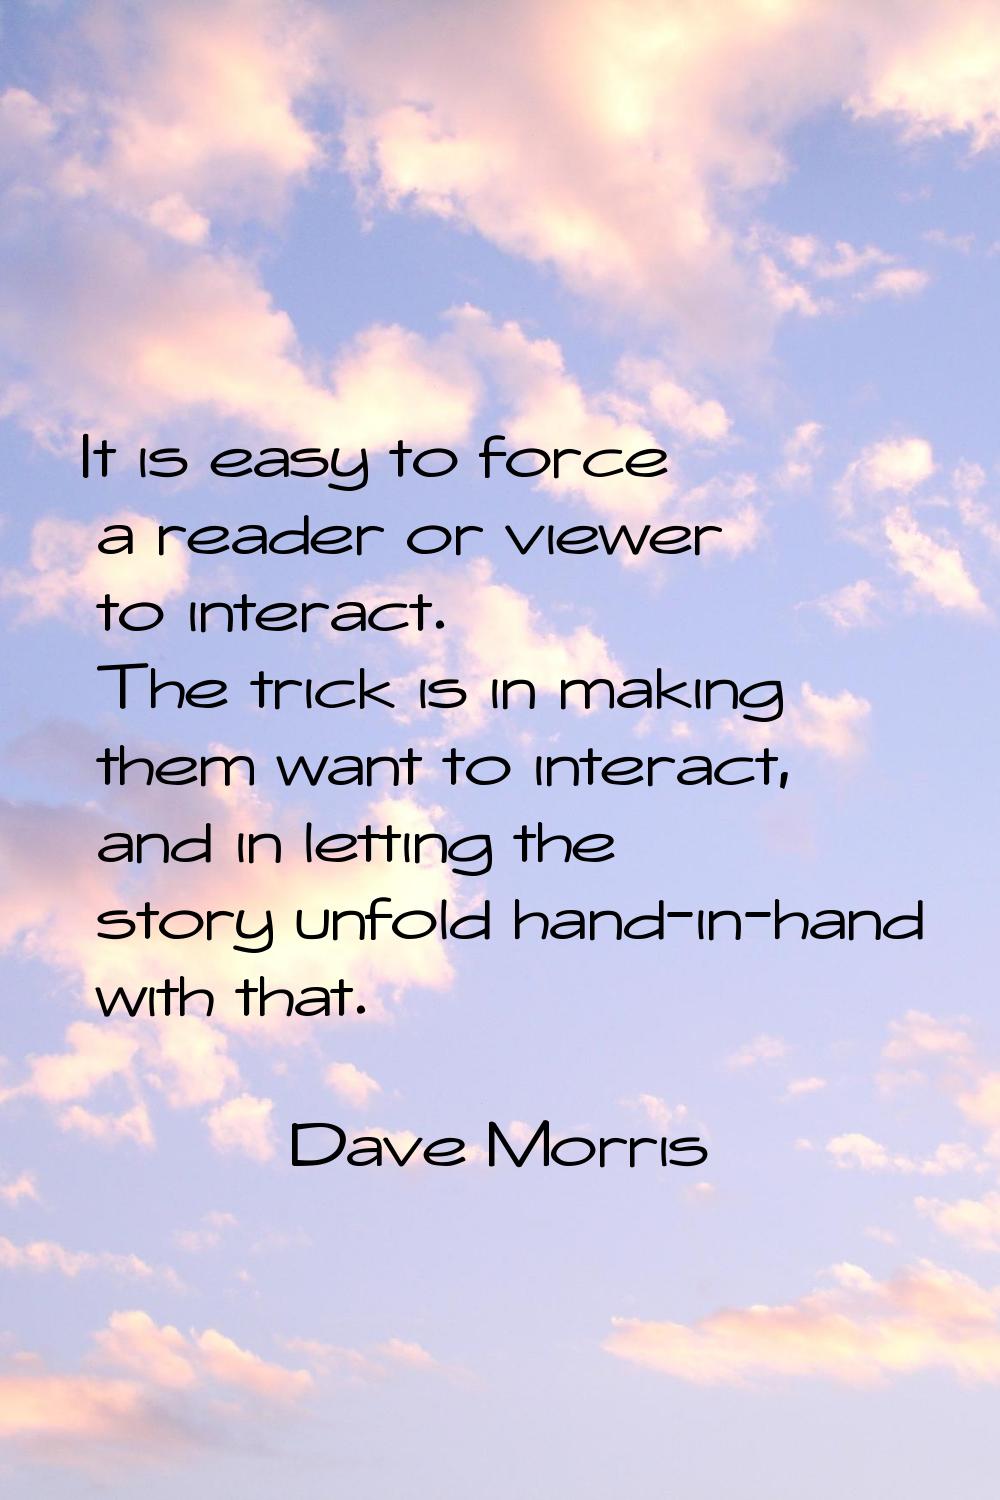 It is easy to force a reader or viewer to interact. The trick is in making them want to interact, a